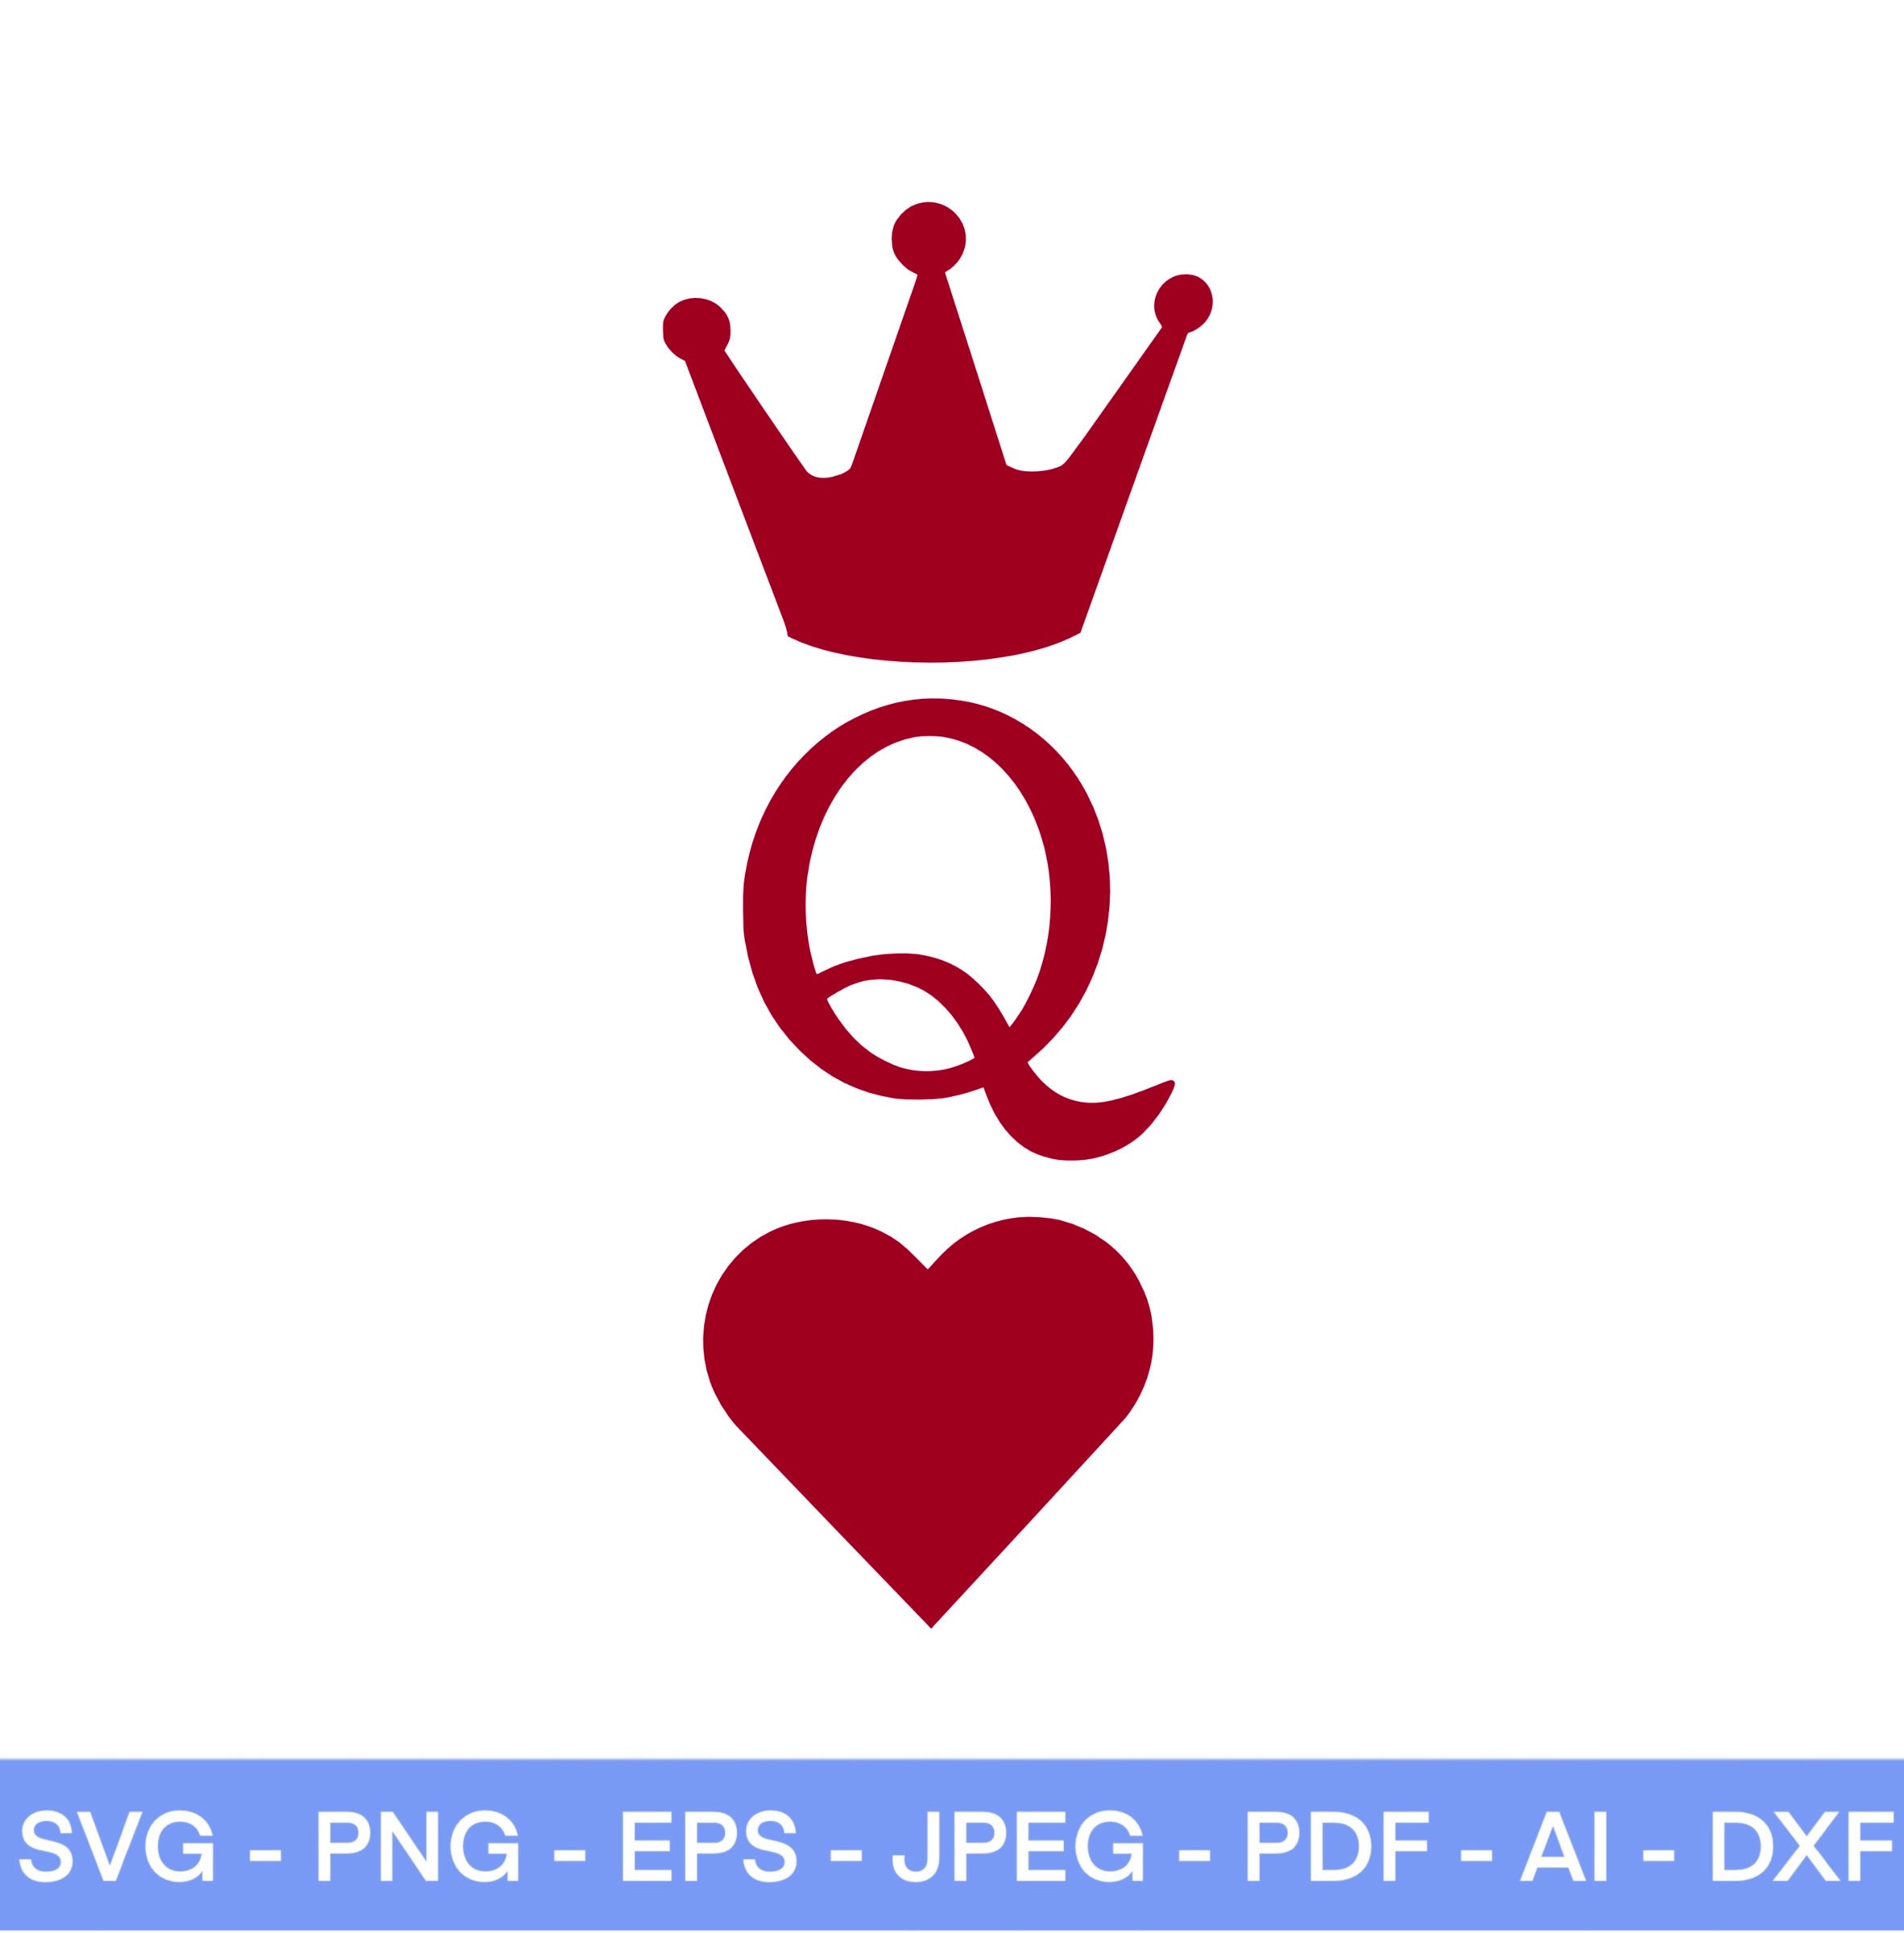 Queen of Hearts Svg Queen SVG Crown Svg EPS PNG Jpeg - Etsy